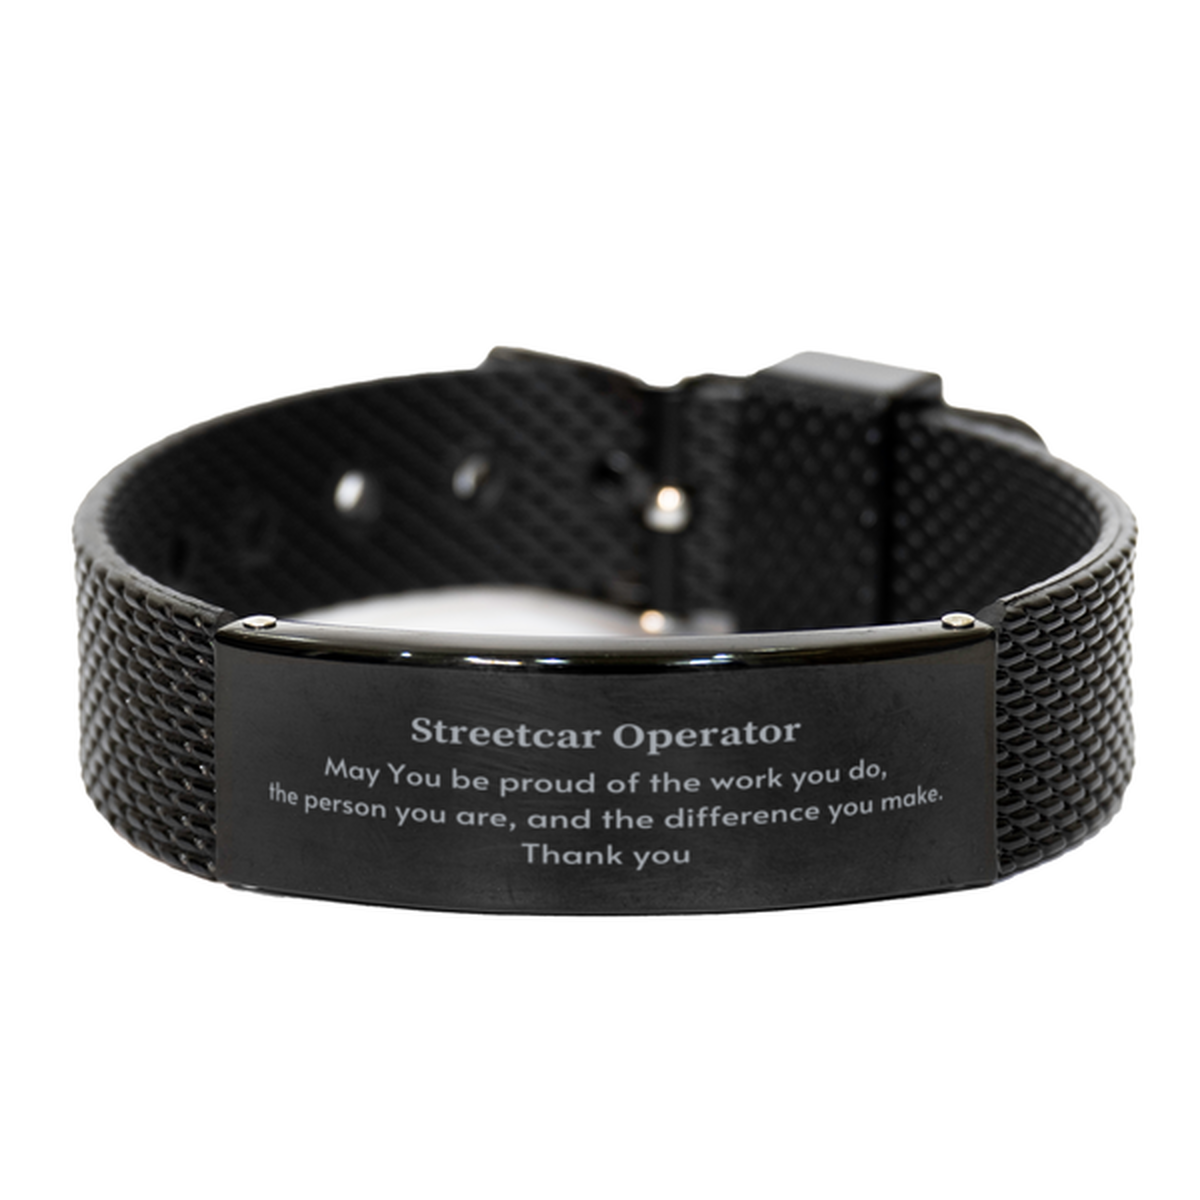 Heartwarming Black Shark Mesh Bracelet Retirement Coworkers Gifts for Streetcar Operator, Streetcar Operator May You be proud of the work you do, the person you are Gifts for Boss Men Women Friends